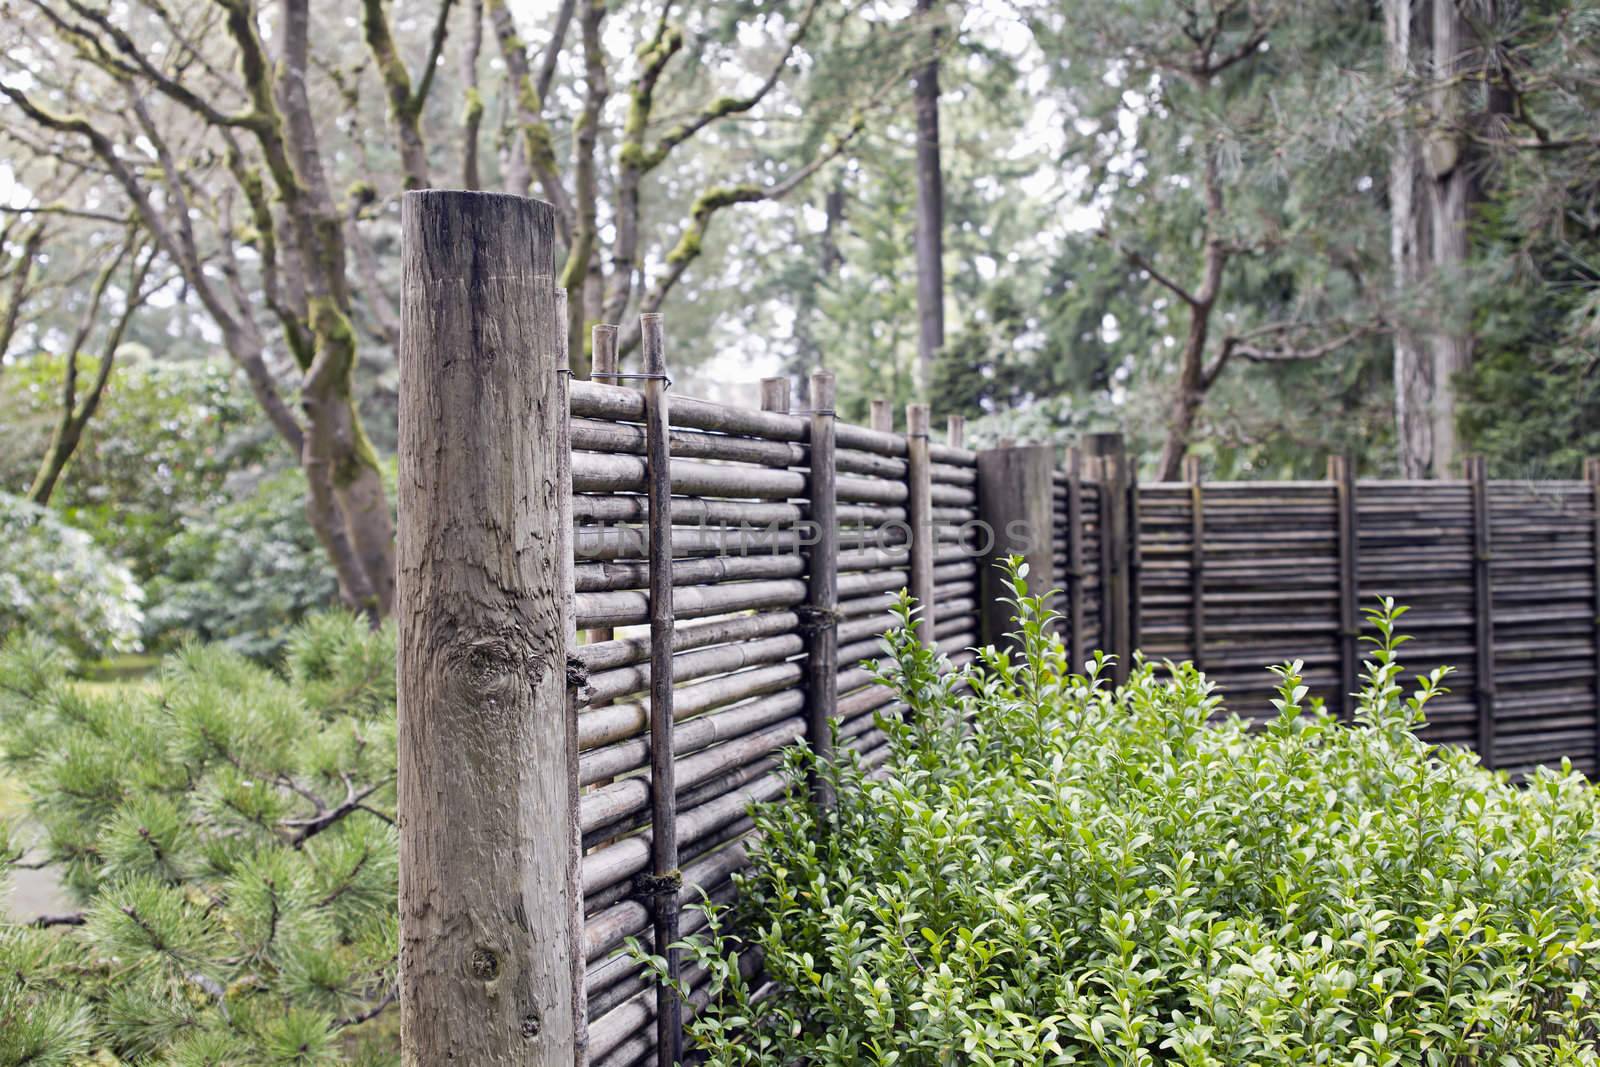 Wood and Bamboo Fencing at Japanese Garden by Davidgn